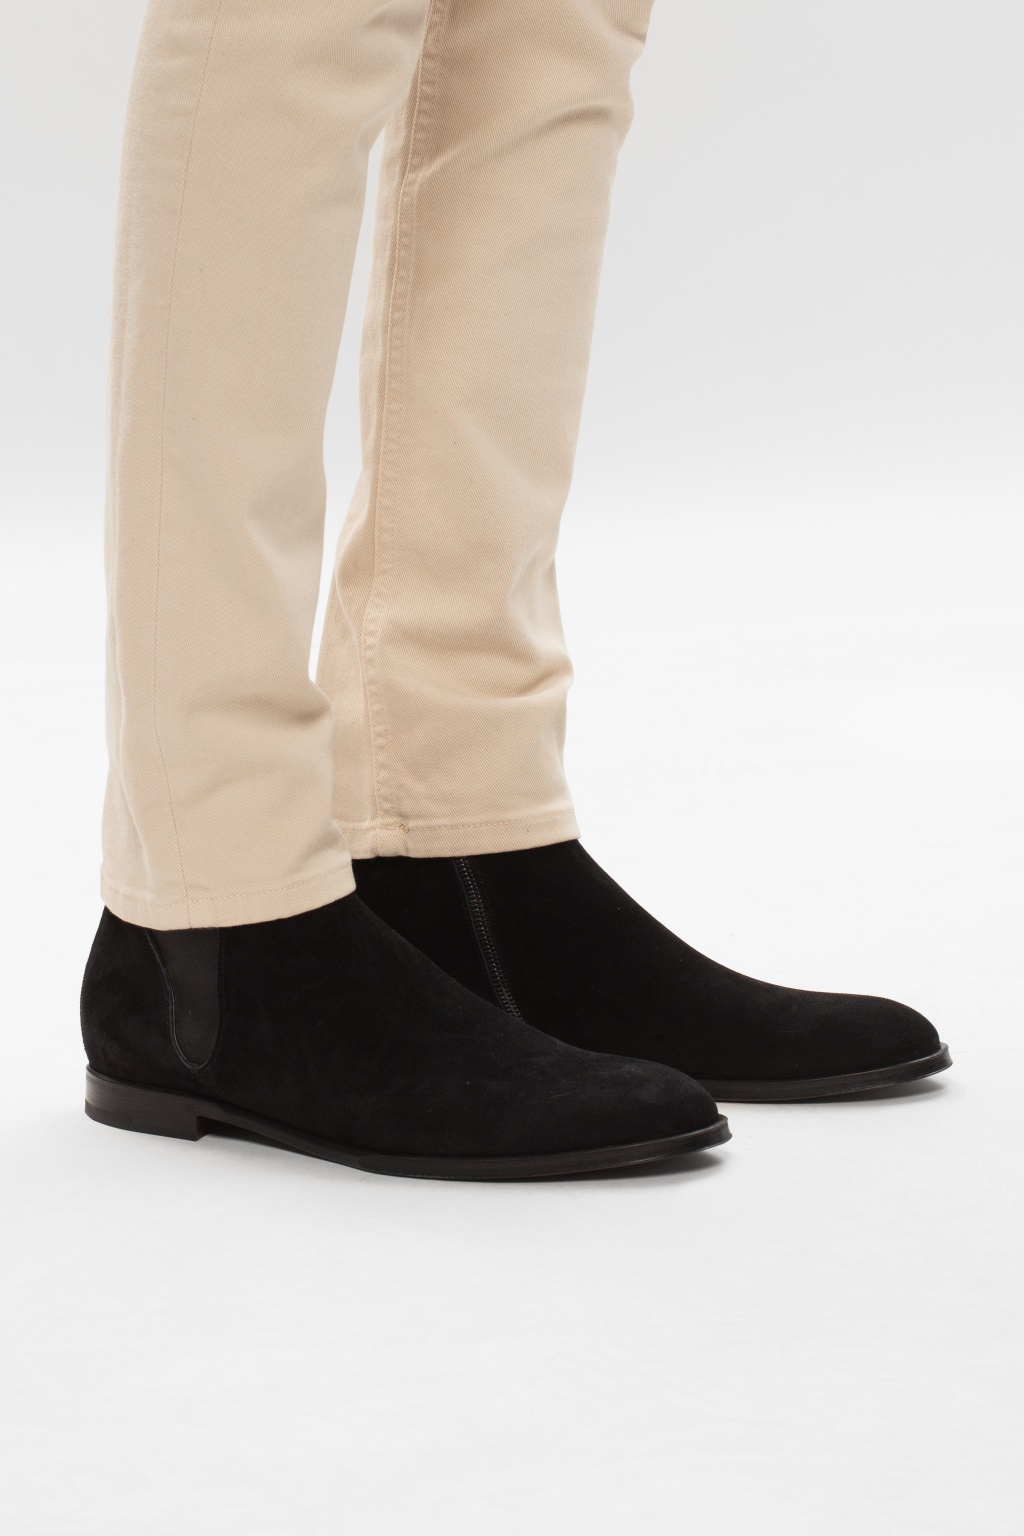 Dolce & Gabbana Suede Chelsea Ankle Boots